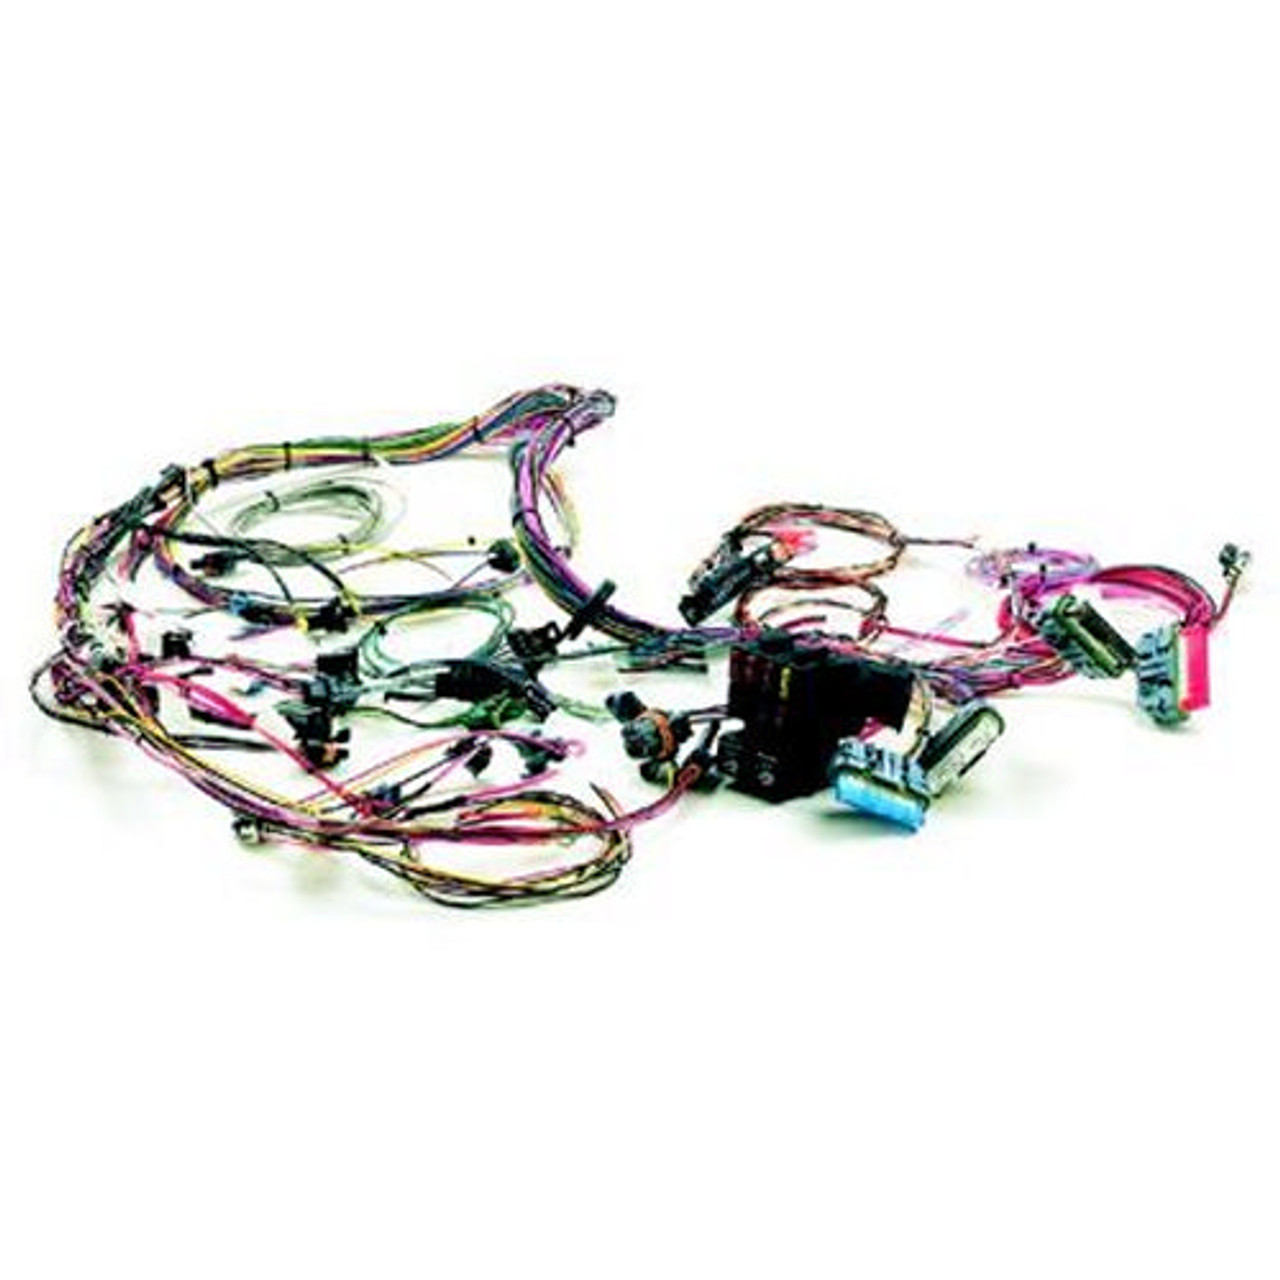 Painless LT-1 Wiring Harness 92-97 5.7L - PWI60505